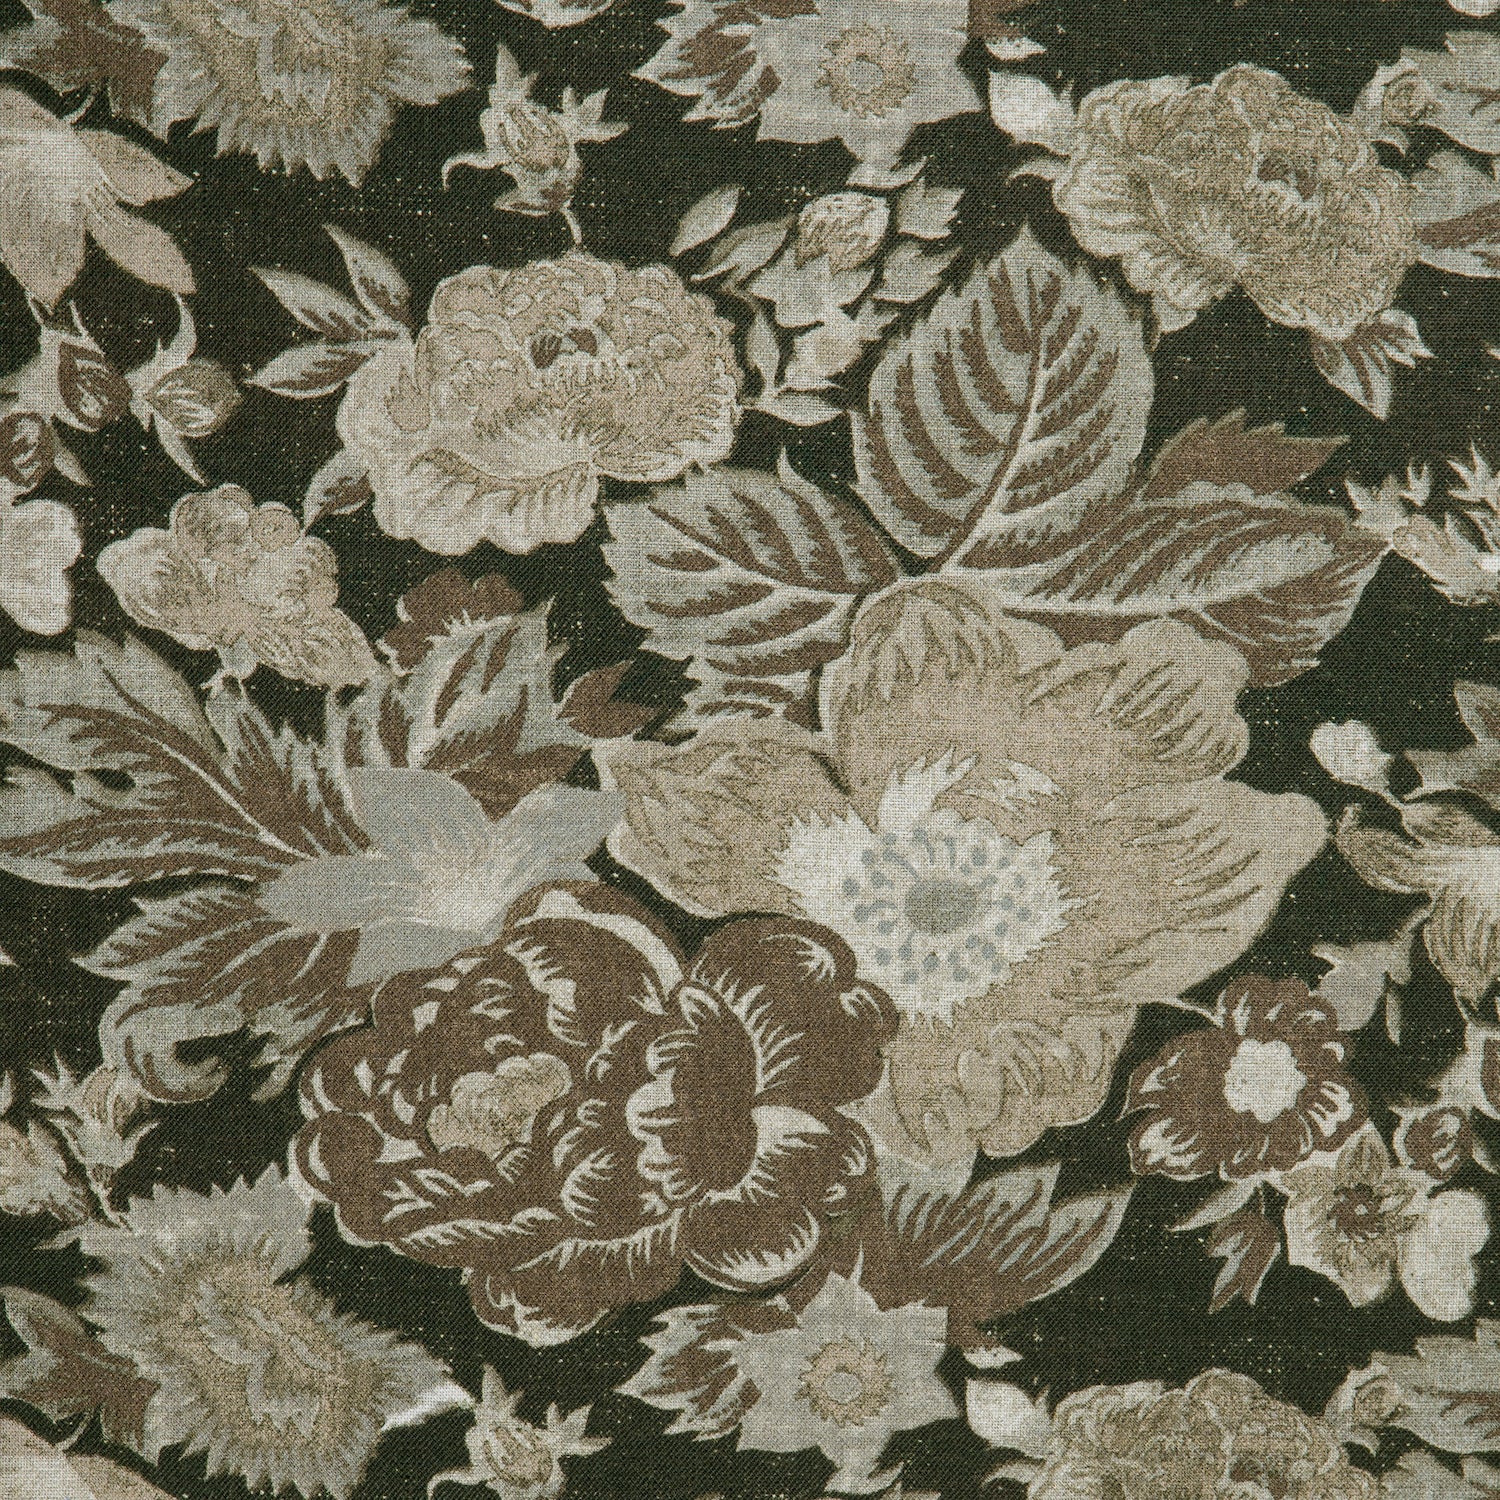 Detail of a linen fabric in a detailed floral pattern in shades of beige and brown on a black field.